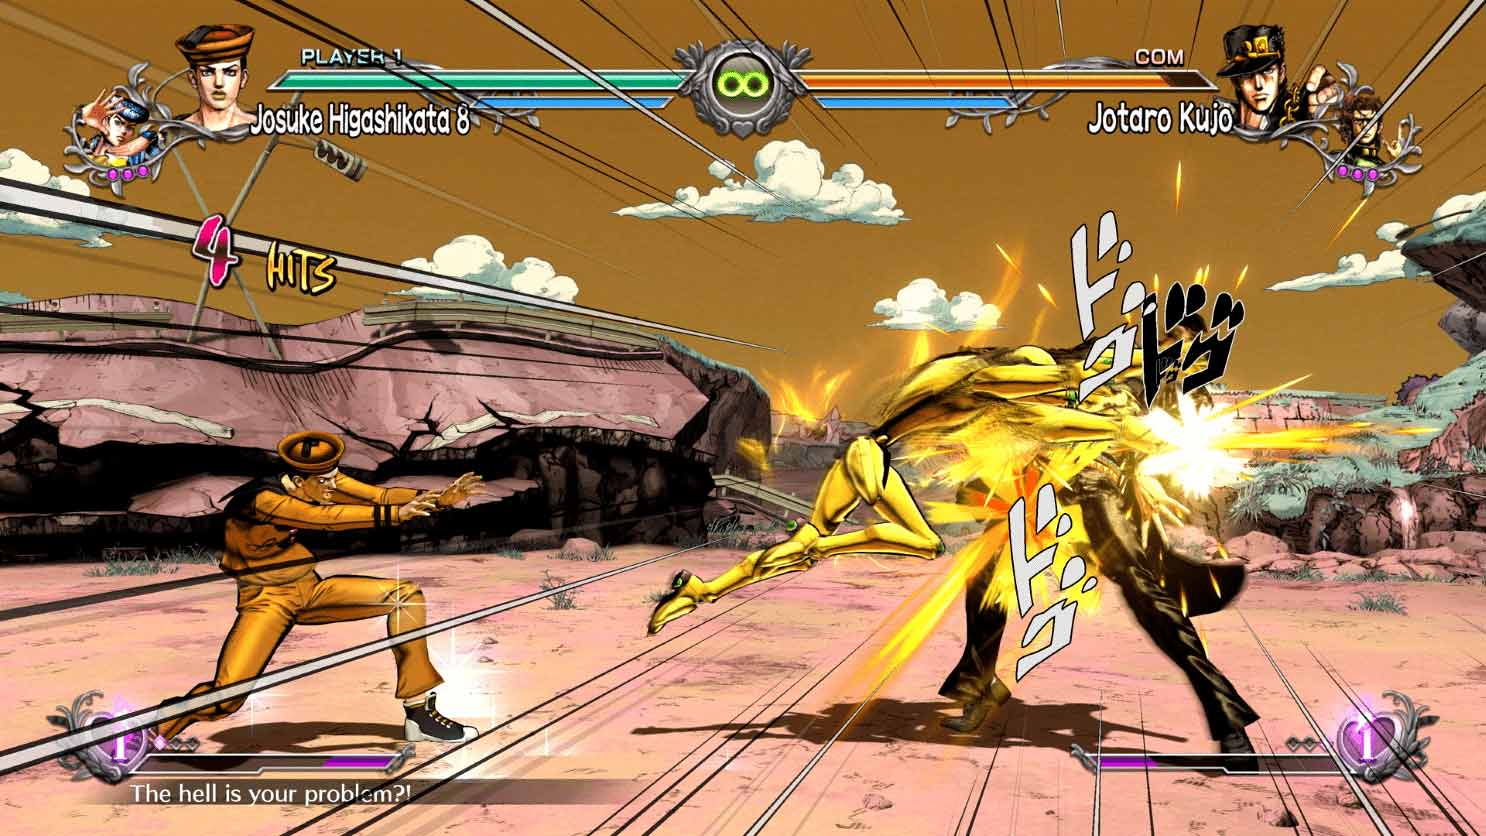 JoJo’s Bizarre Adventure: All Star Battle R (English), JoJo’s Bizarre Adventure All Star Battle R, PlayStation 4, PS4, PlayStation 4, Switch, Nintendo Switch, PS5, PlayStation 5, release date, trailer, screenshots, pre-order now, Asia, English Release, Asia English, Bandai Namco